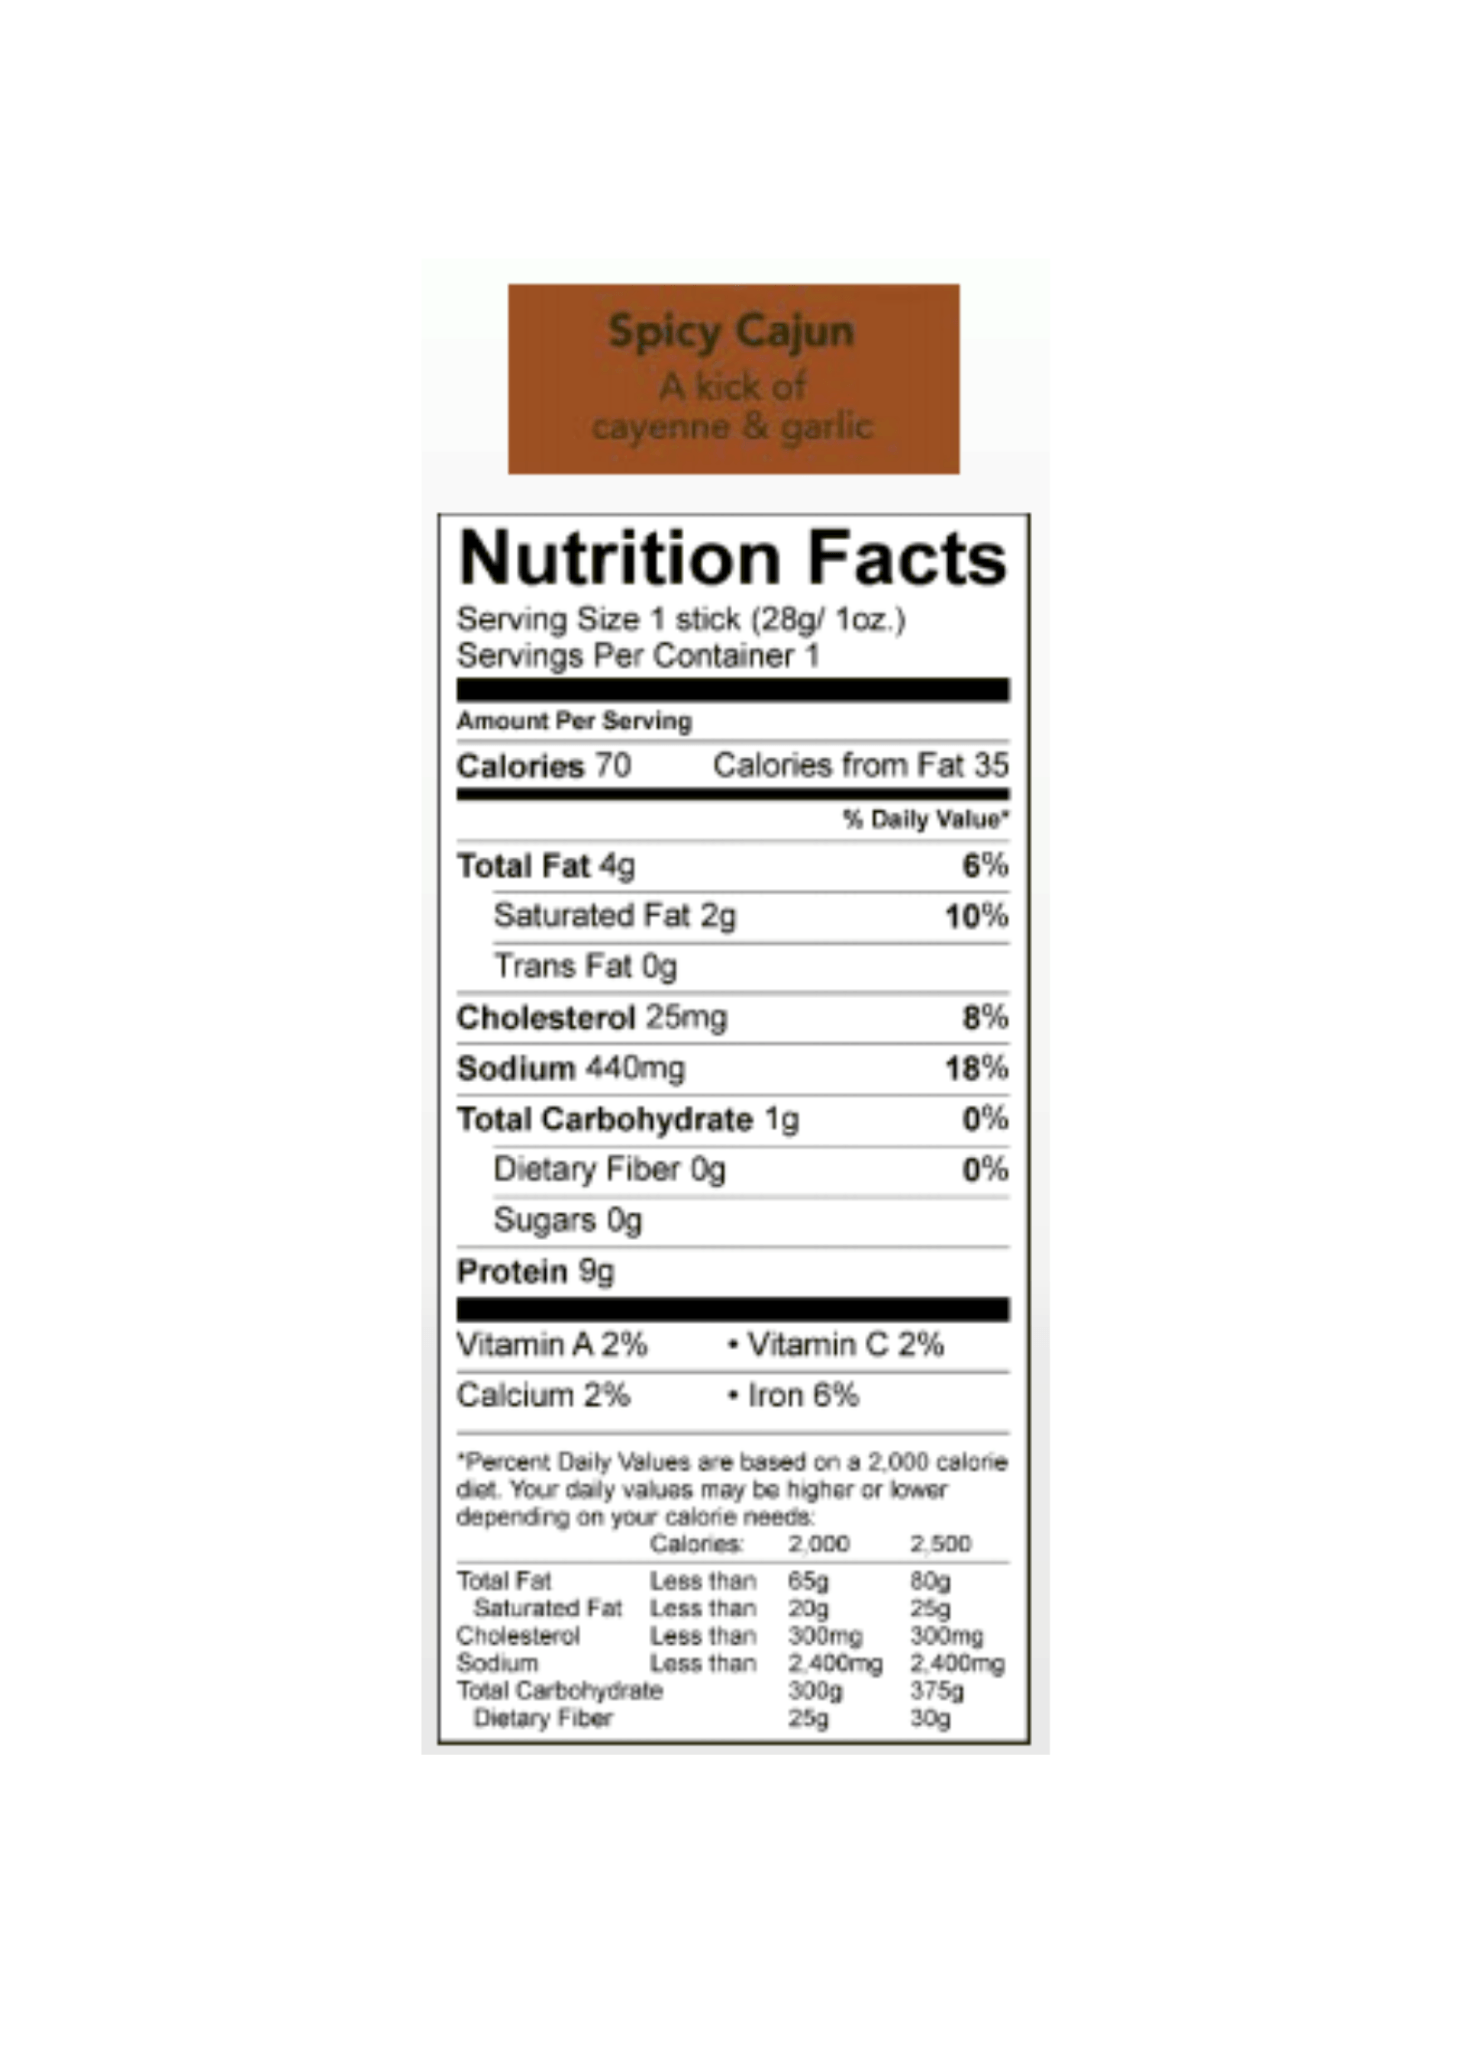 Landcrafted Foods Spicy Cajun Beef Stick Nutrition Facts